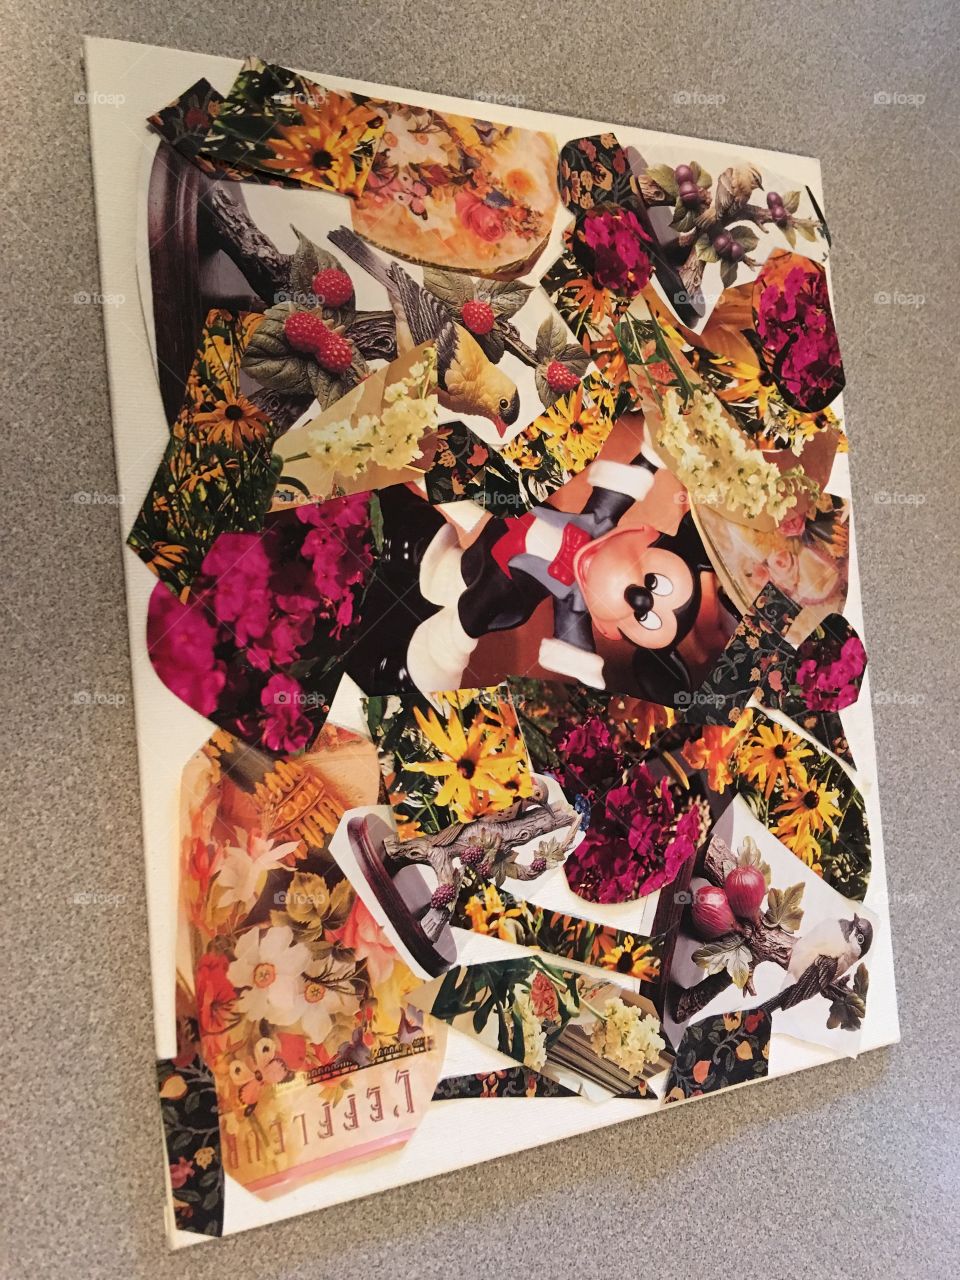 Mickey Mouse collage celebrating spring by surrounding himself with flowers! Full of spring colors.